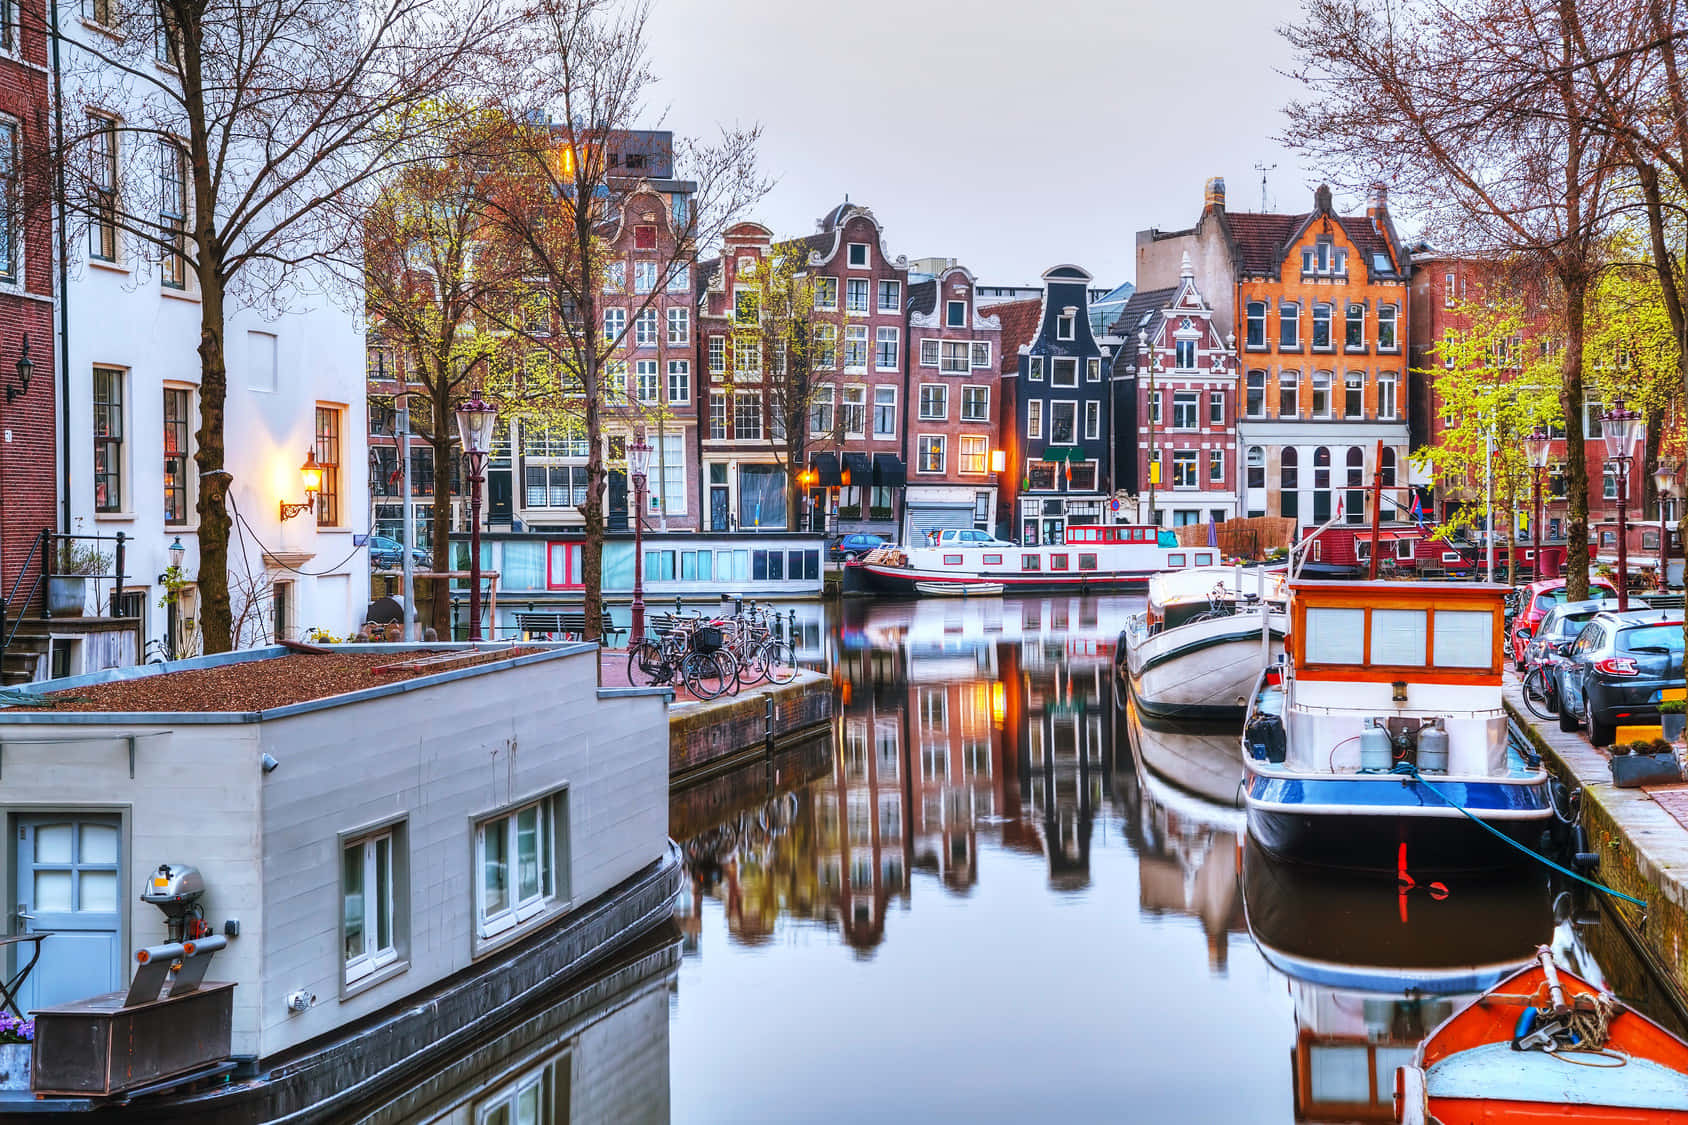 A picturesque skyline of the picturesque Dutch city of Amsterdam